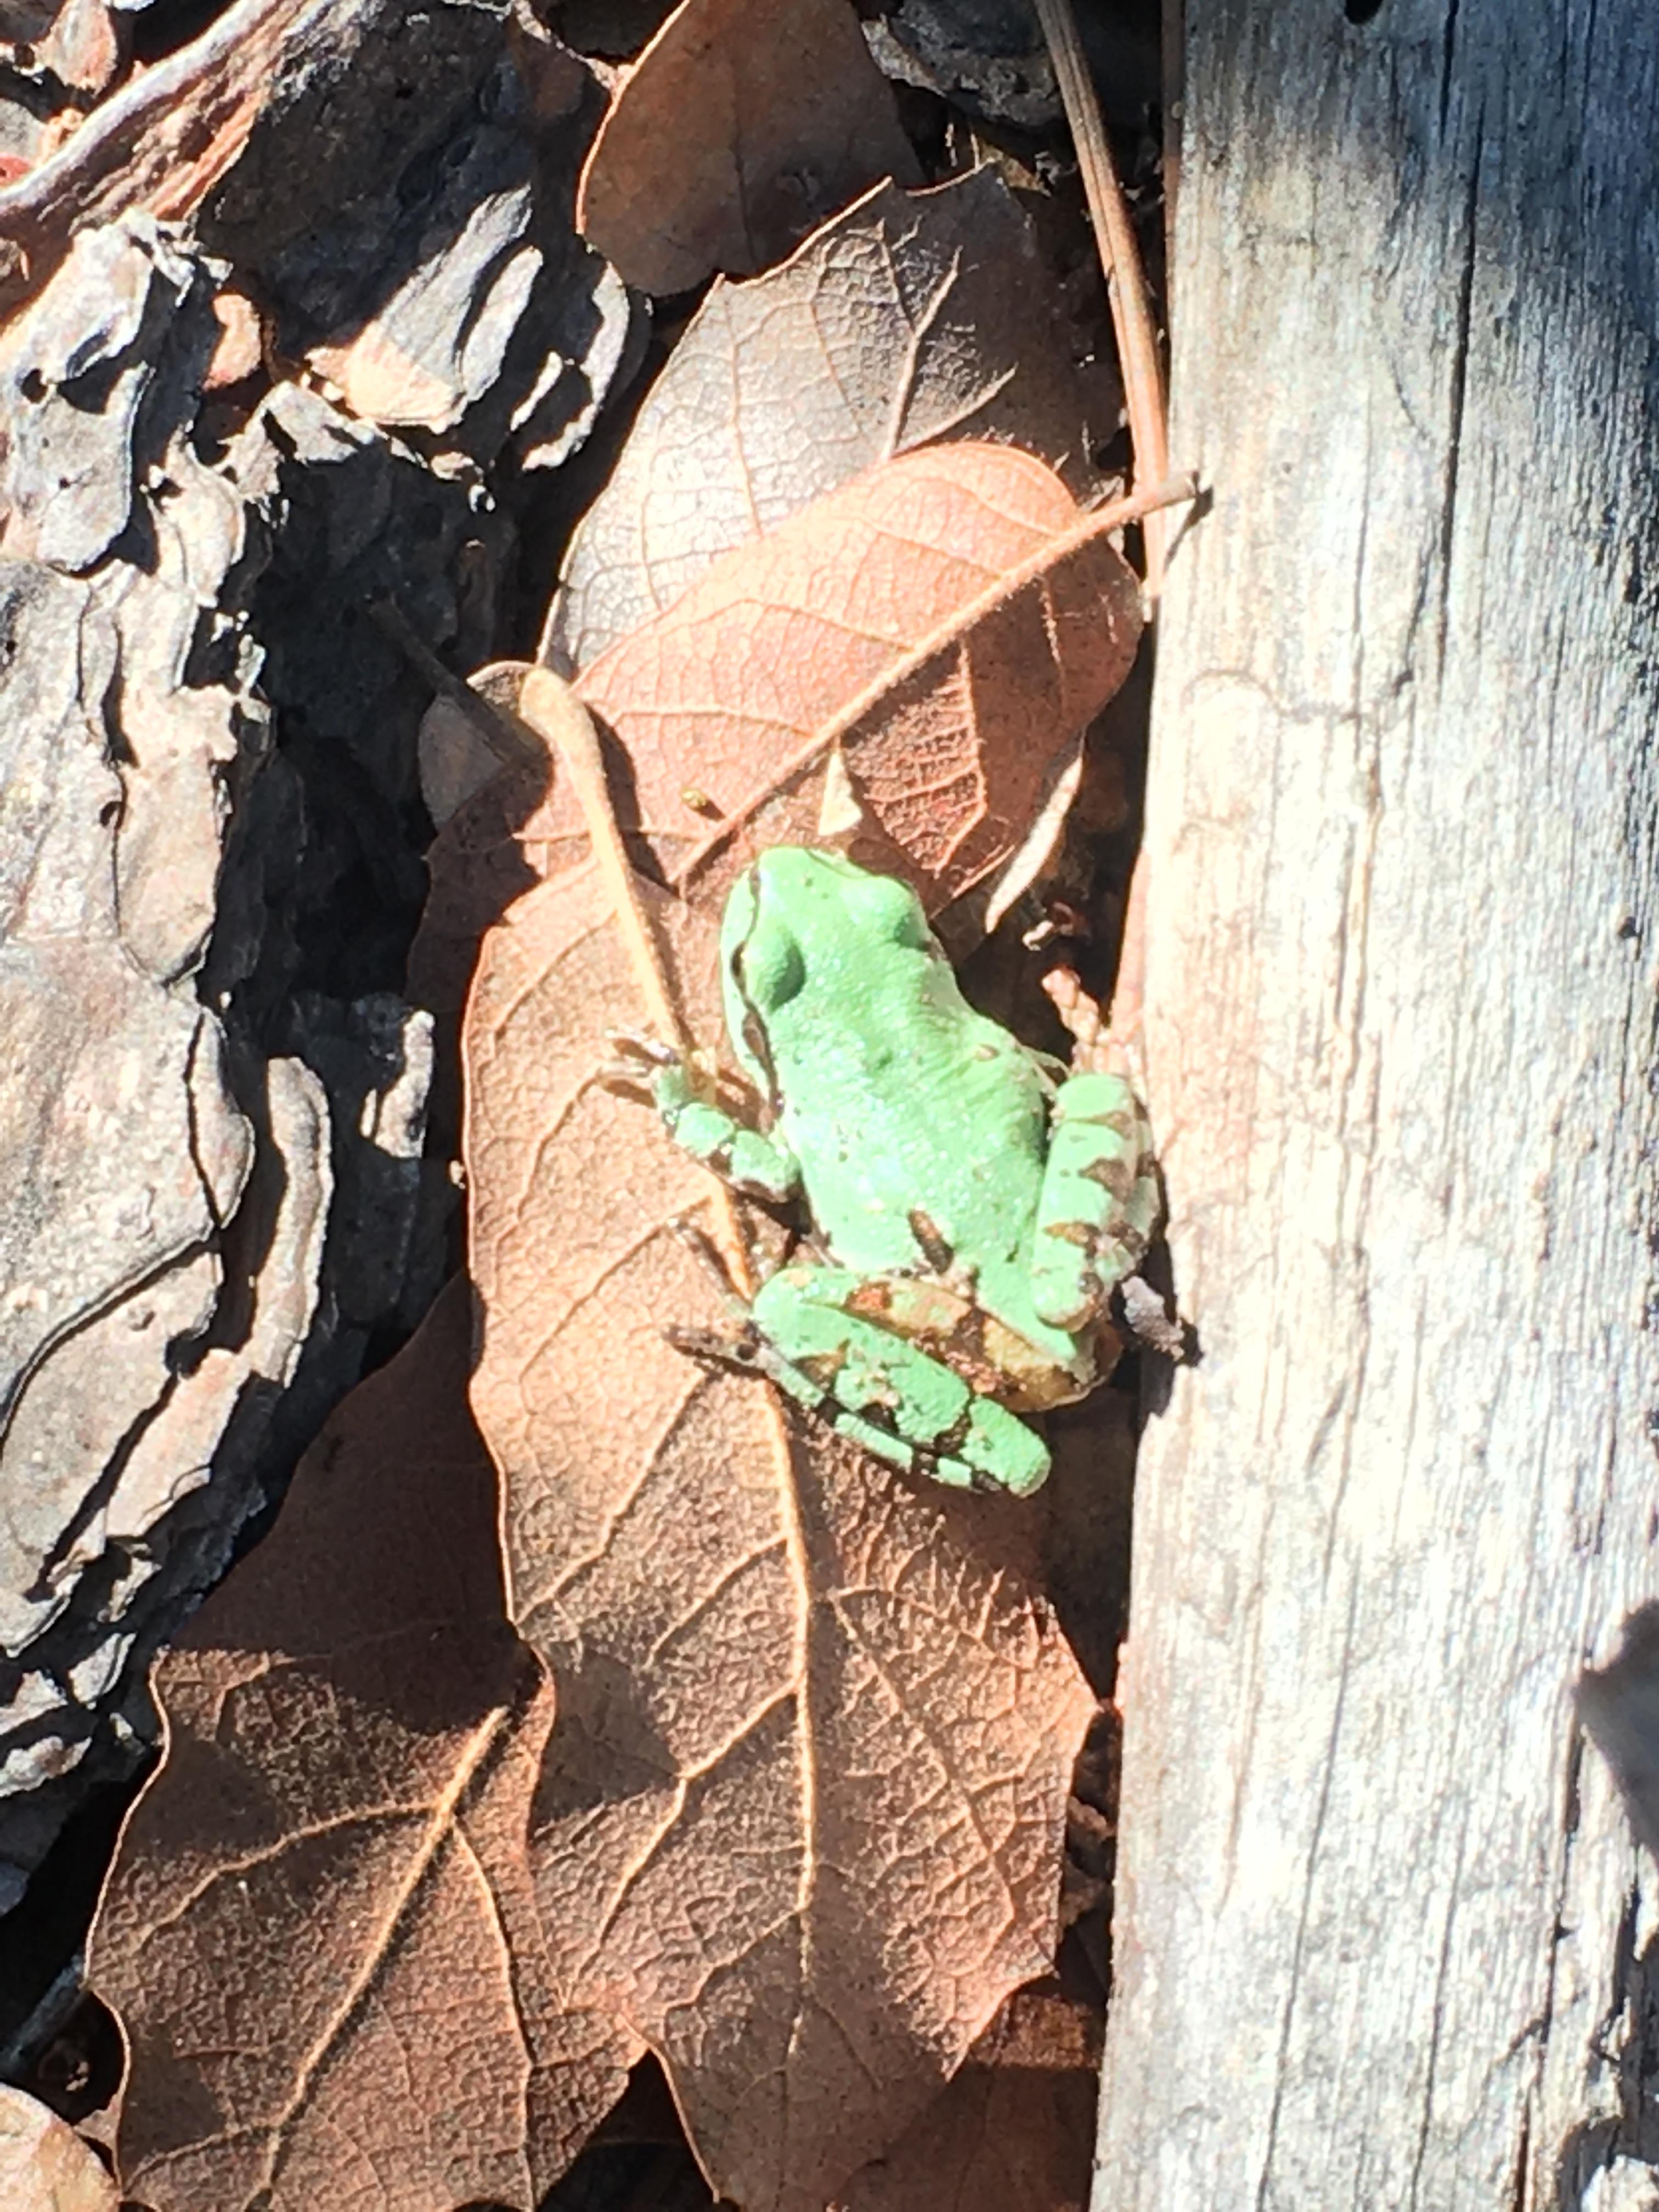 Photo by Kirk Reinke  |  I was scouting for Elk in the mountains around Christopher Creek and found this Arizona Tree Frog.  